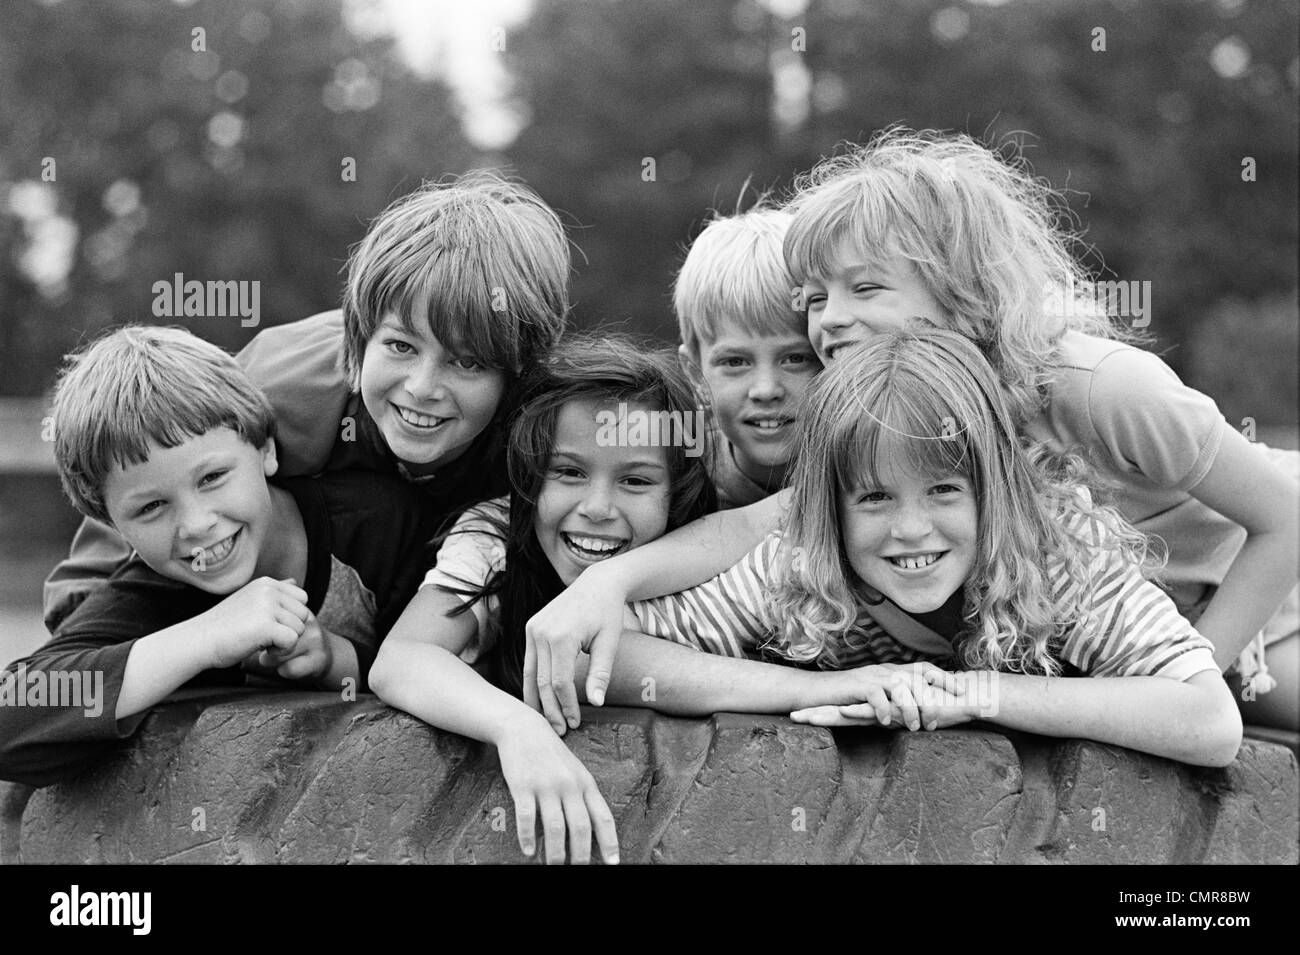 1970s 1980s GROUP OF SIX BOYS & GIRLS GATHERED TOGETHER ON LARGE PLAYGROUND TIRE Stock Photo